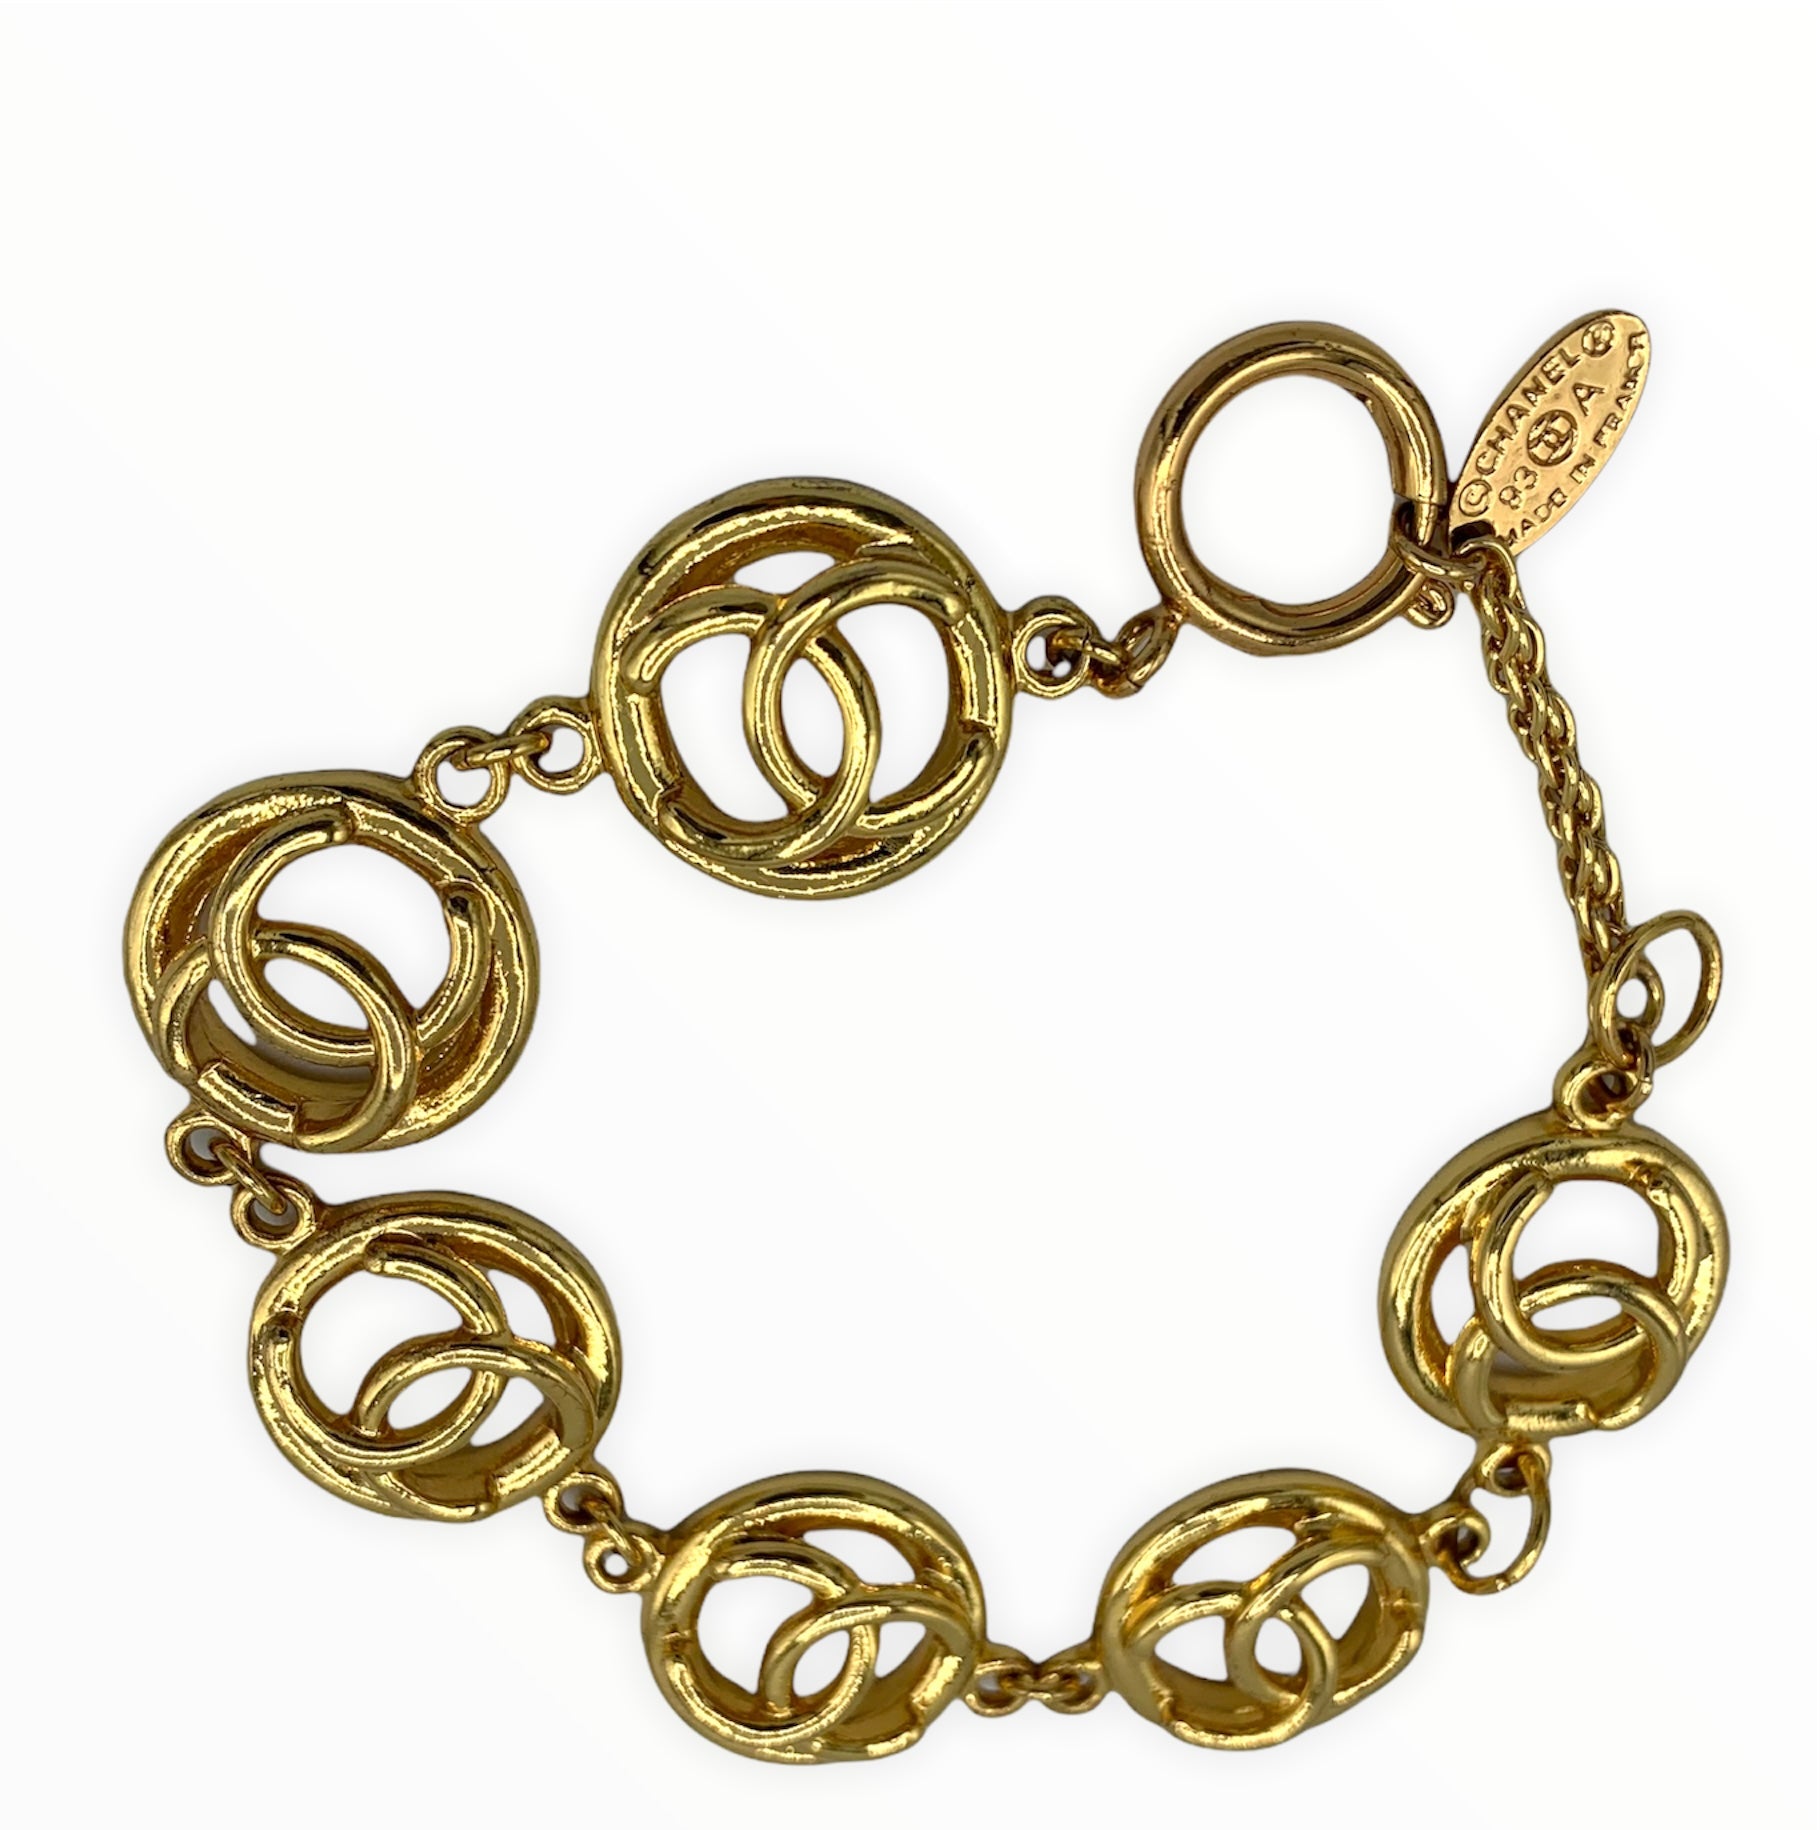 Vintage Iconic CHANEL Charms Chunky Bracelet 